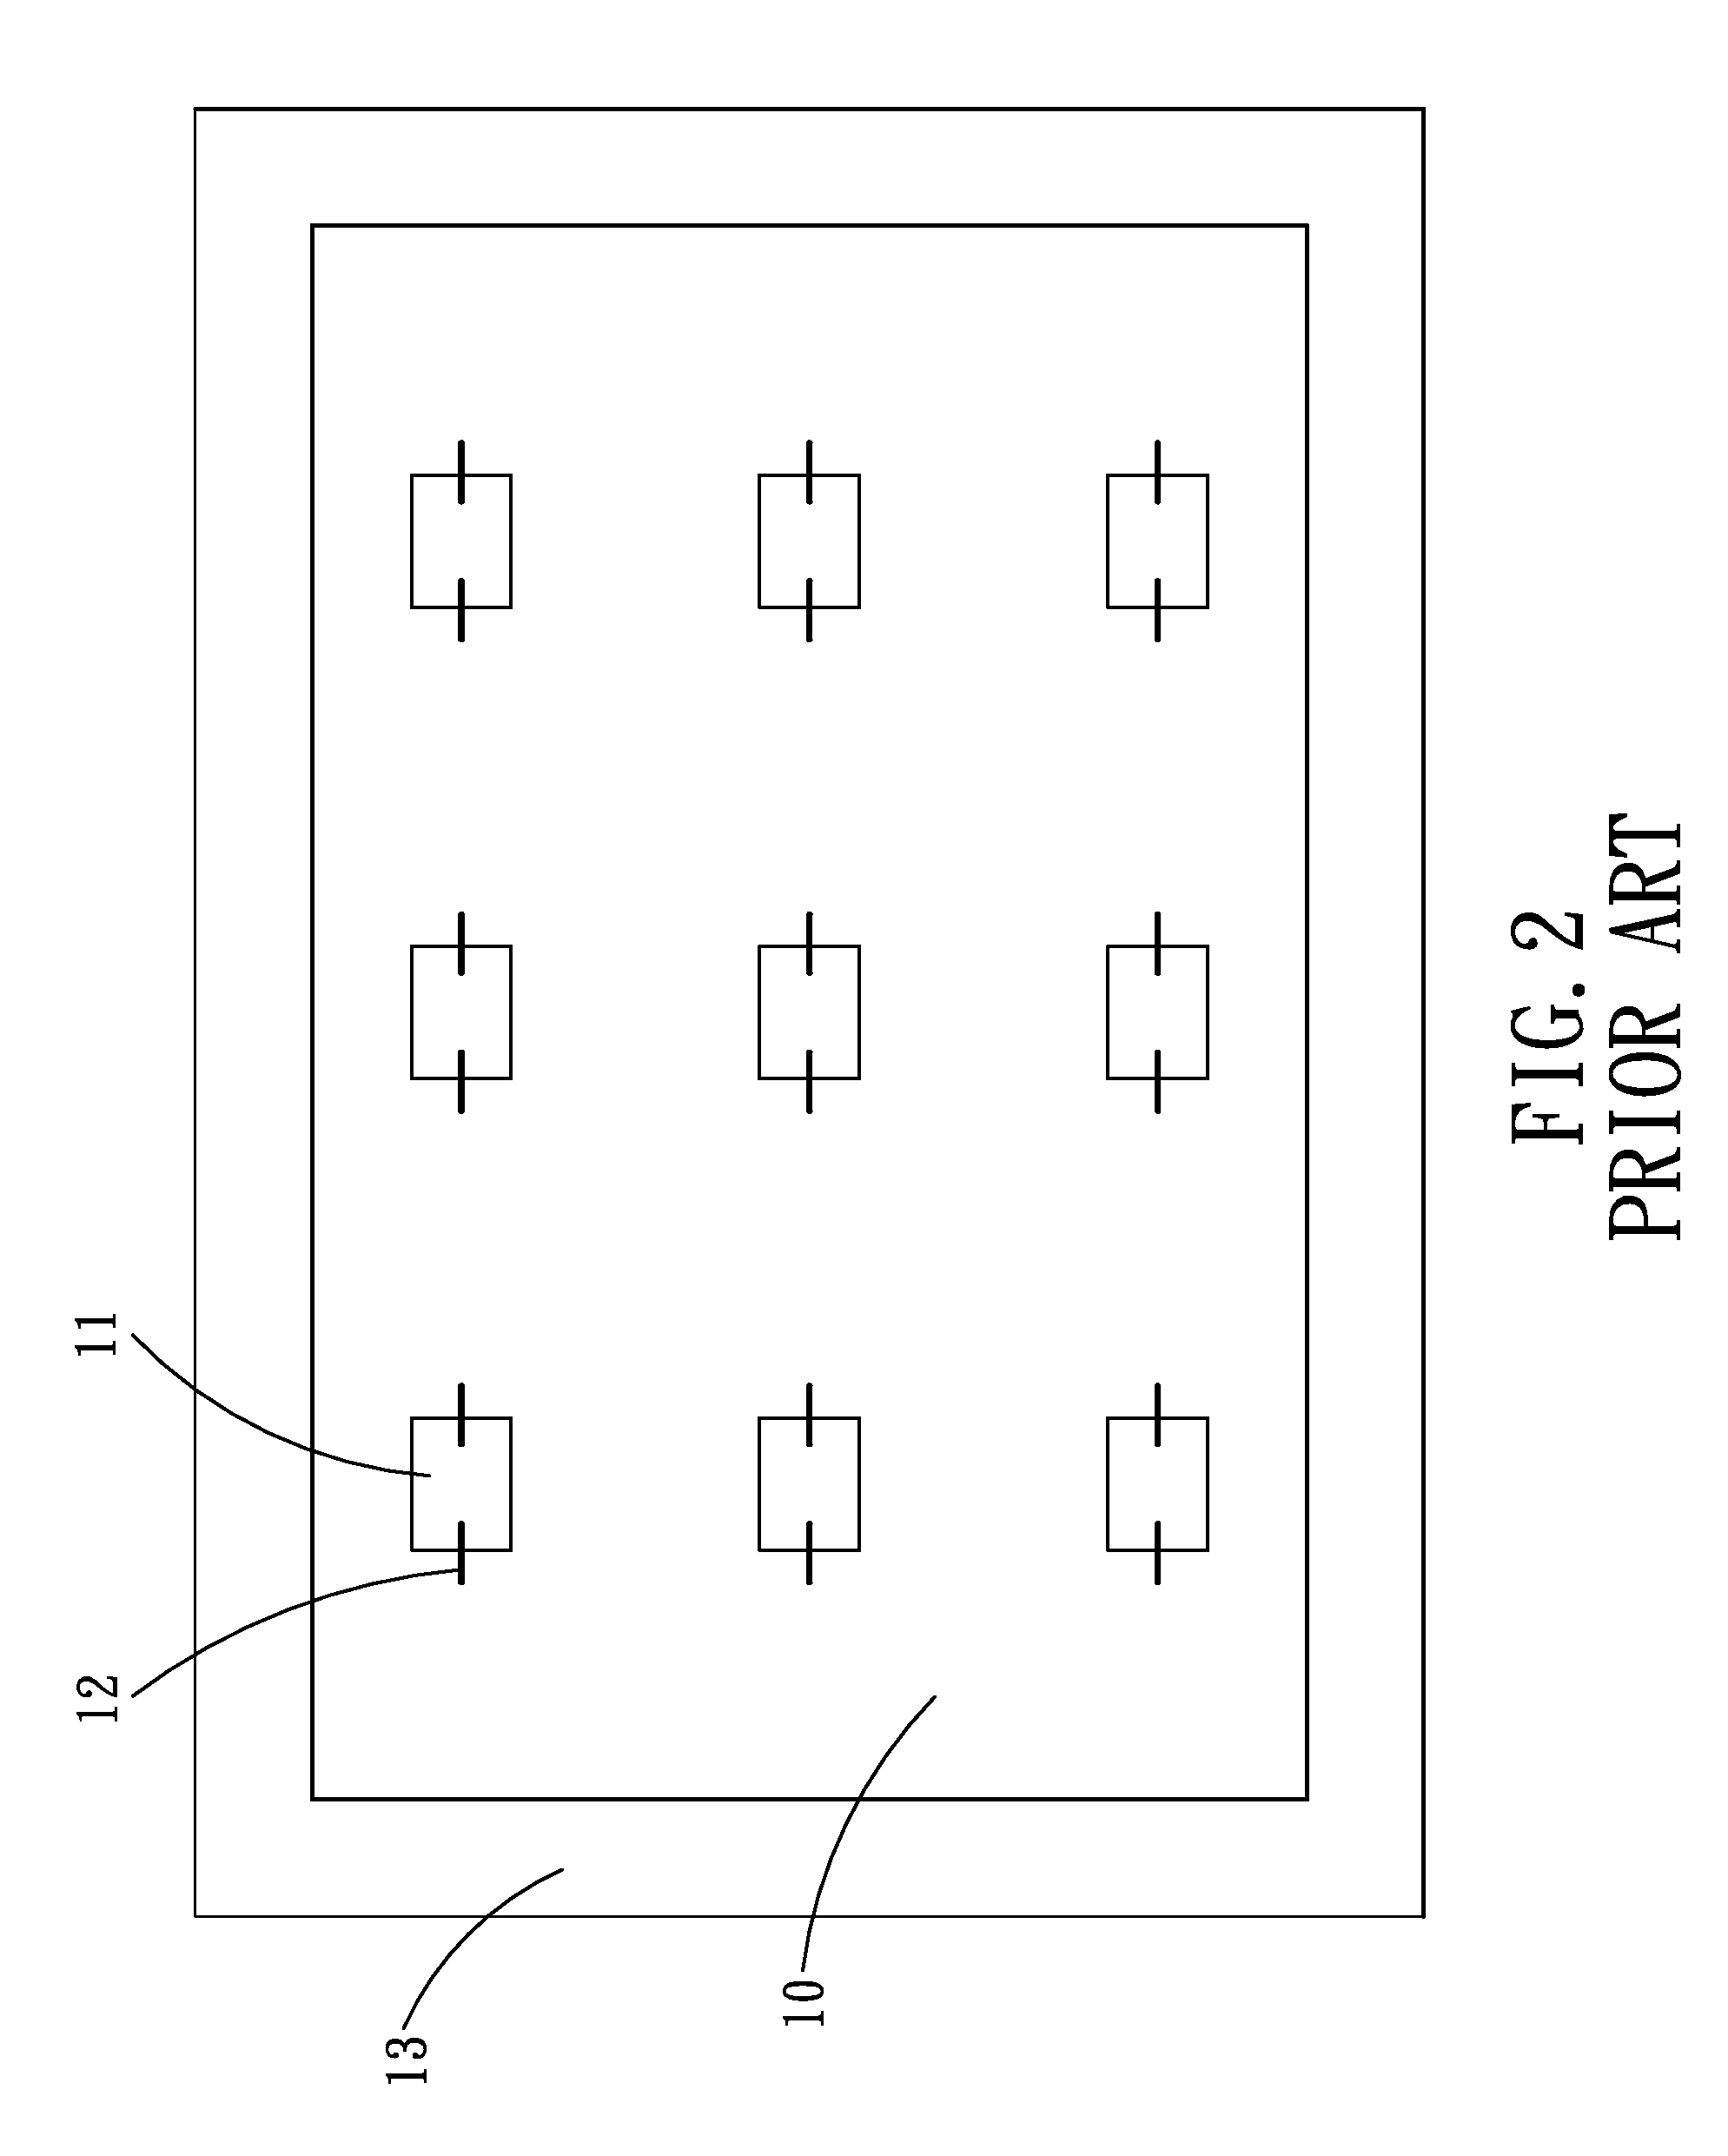 Packaging method for light emitting diode module that includes fabricating frame around substrate